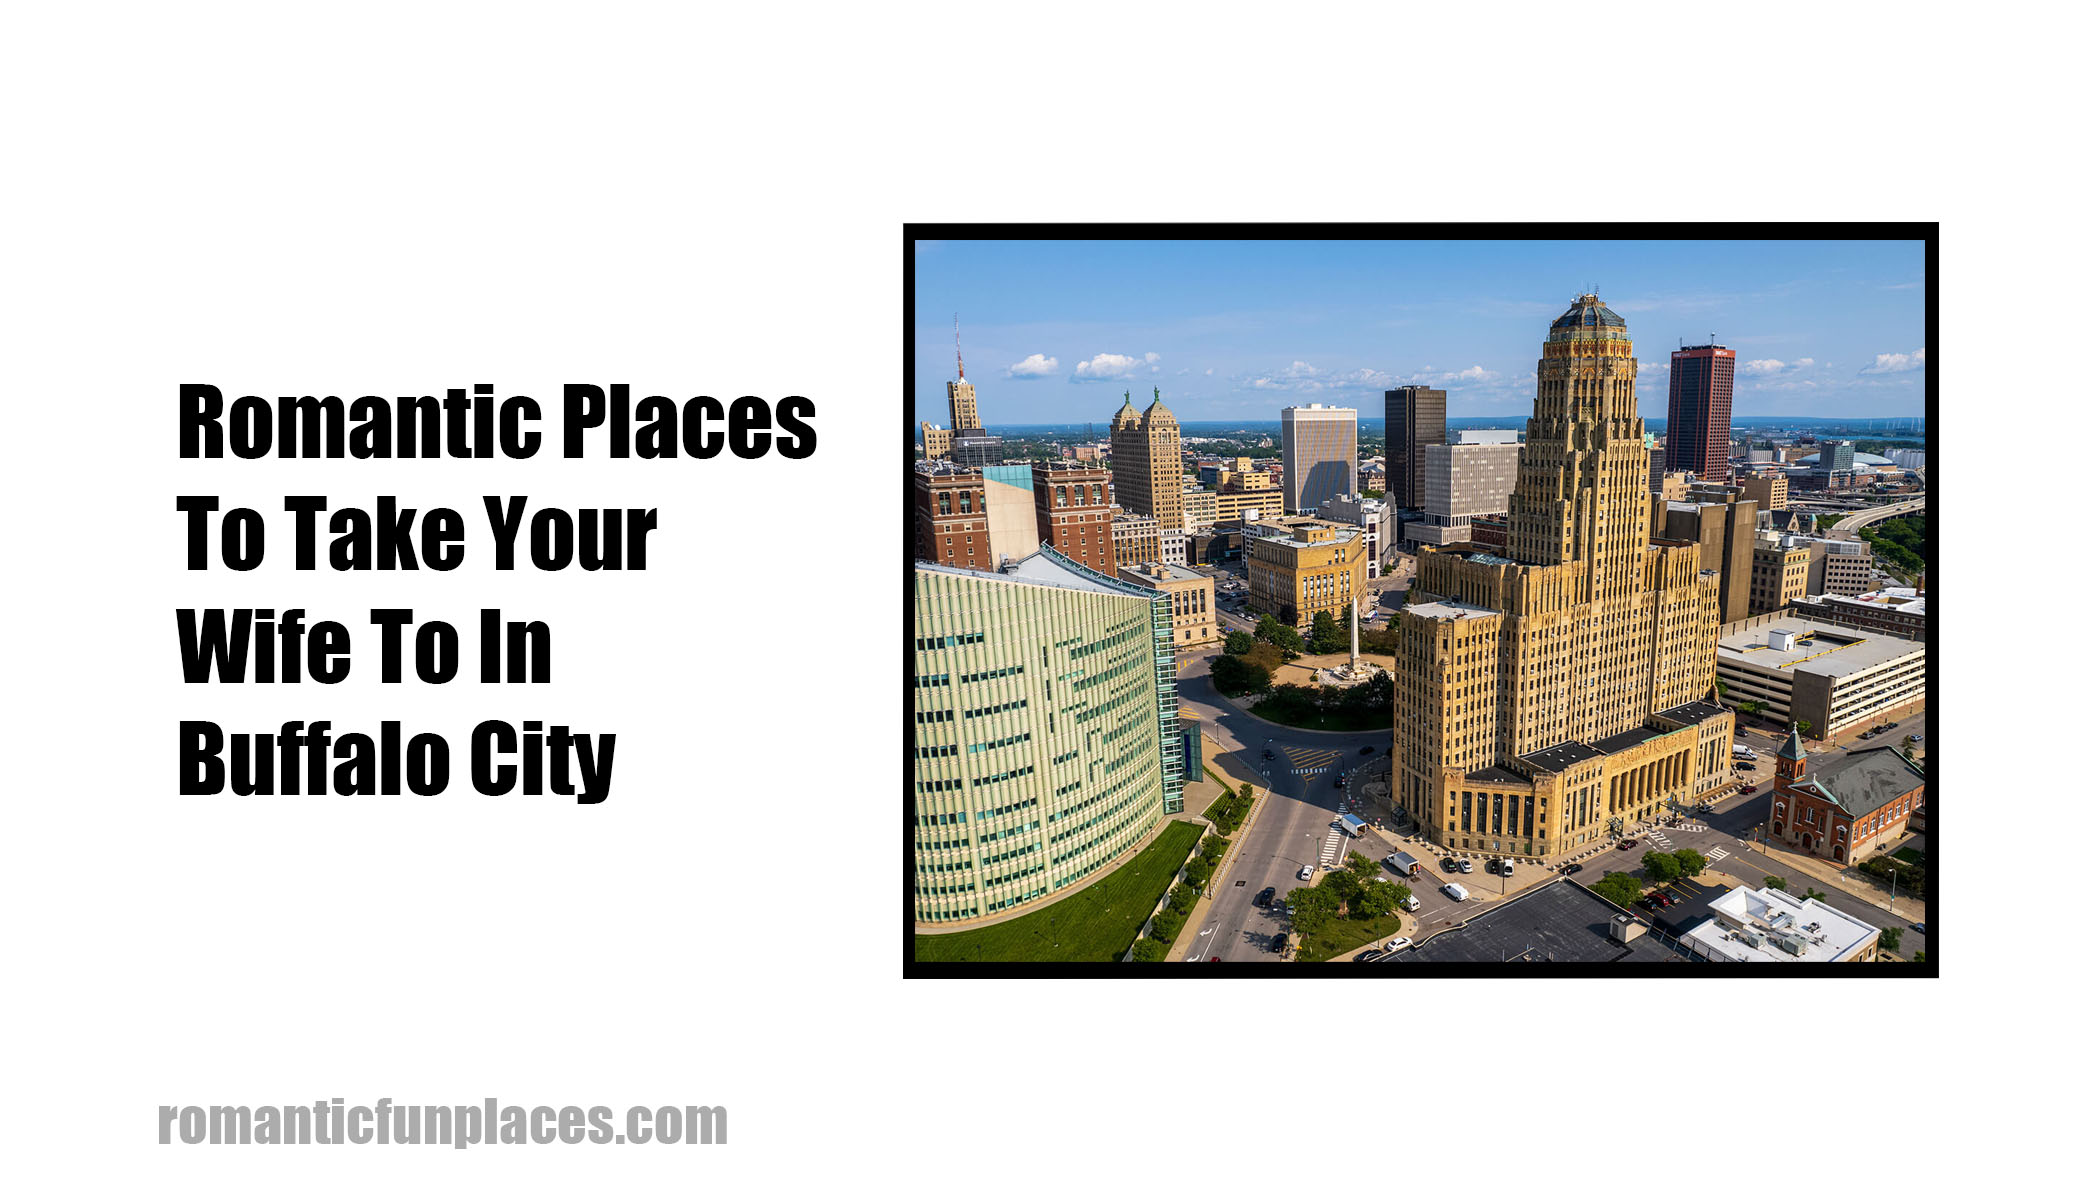 Romantic Places To Take Your Wife To In Buffalo City